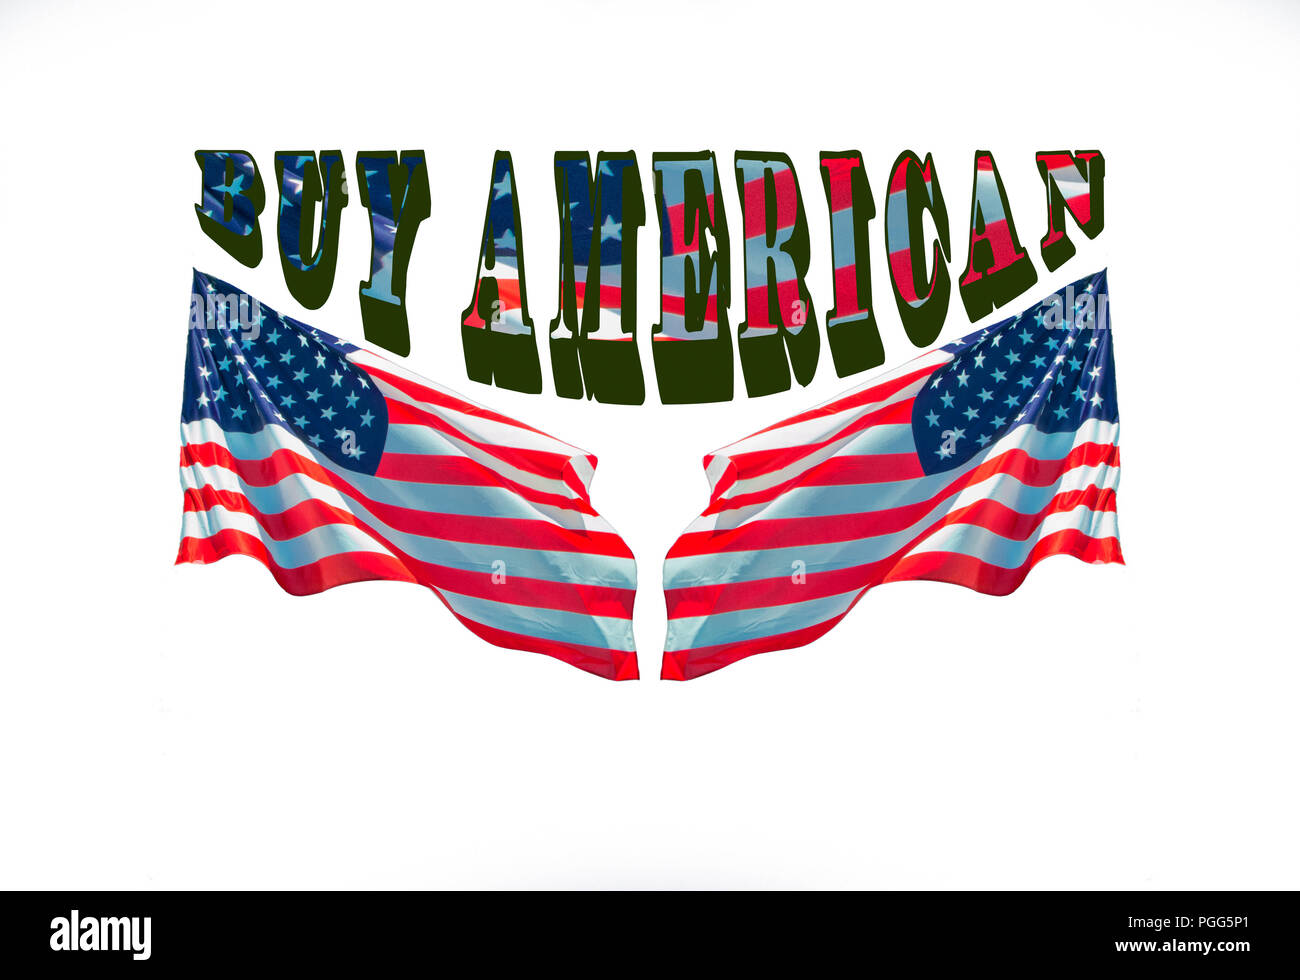 Pour buy American made in USA logo concept patriotique. Banque D'Images